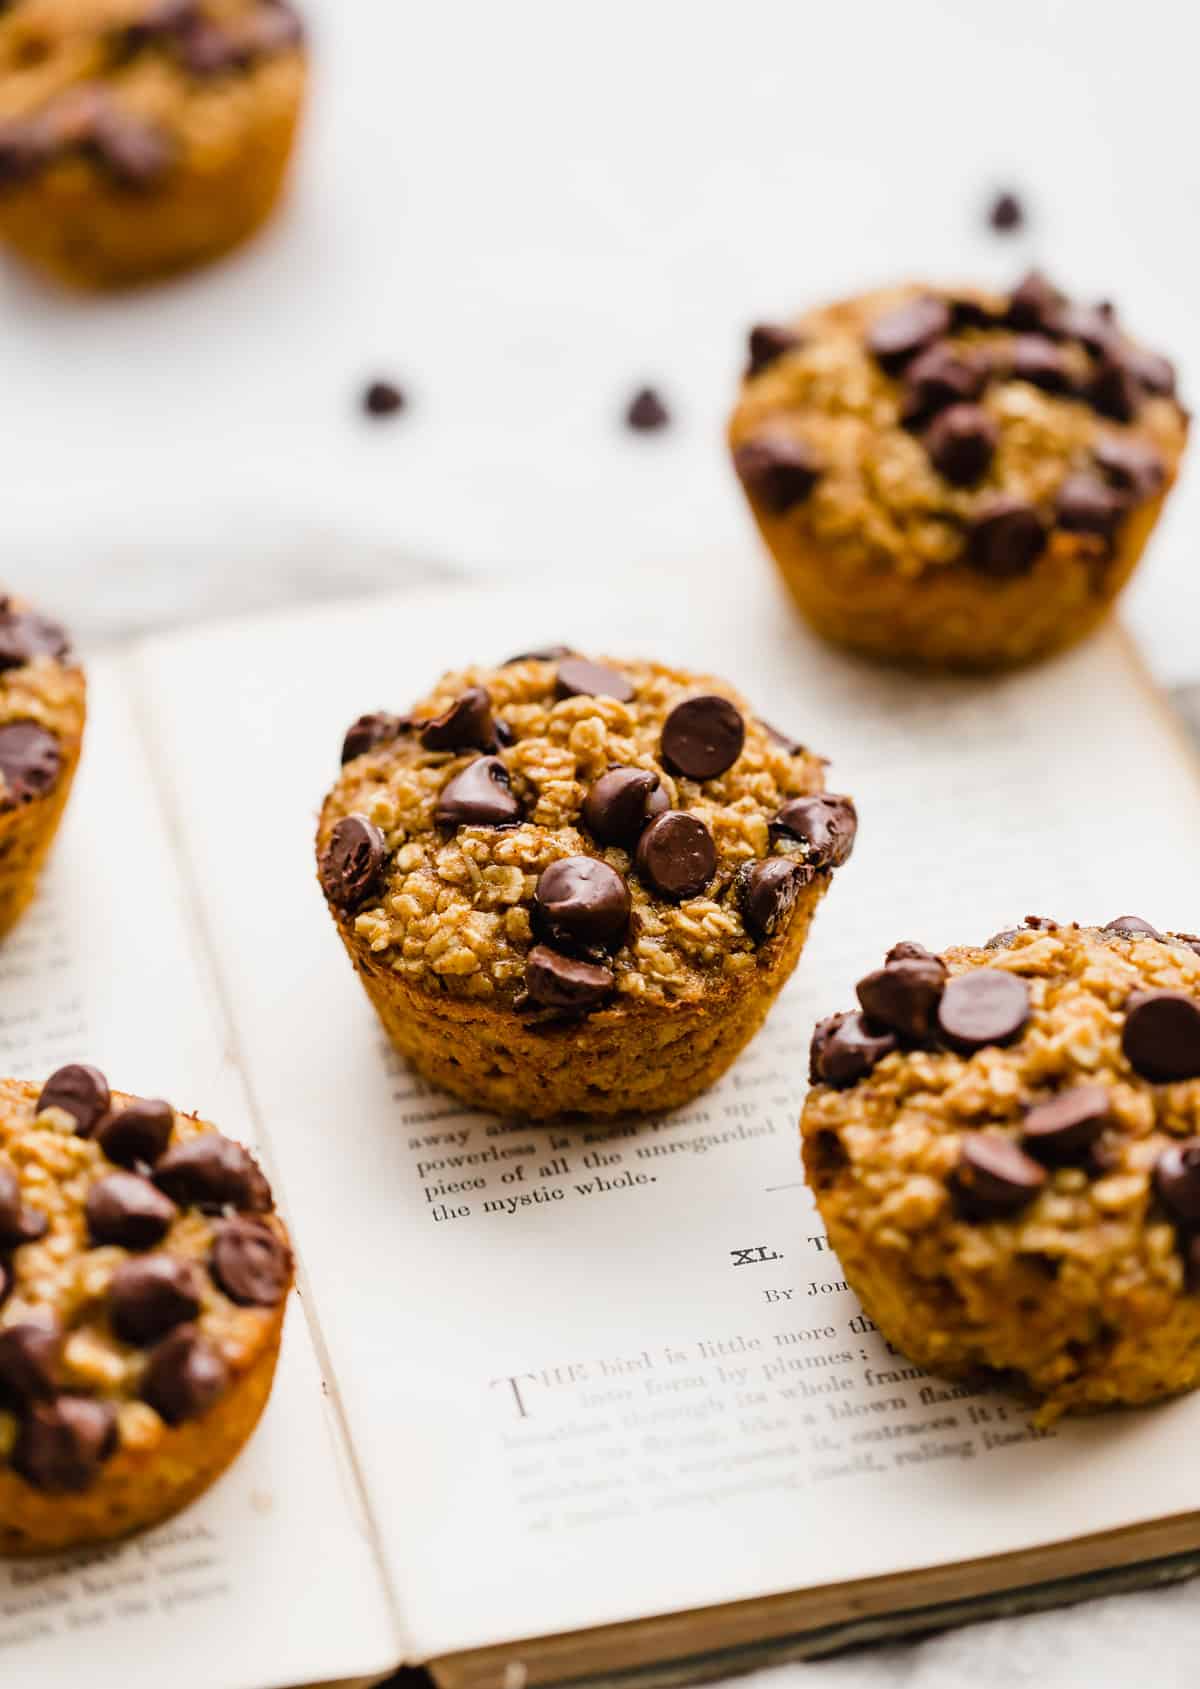 A Pumpkin Baked Oatmeal Cup topped with chocolate chips on a book.